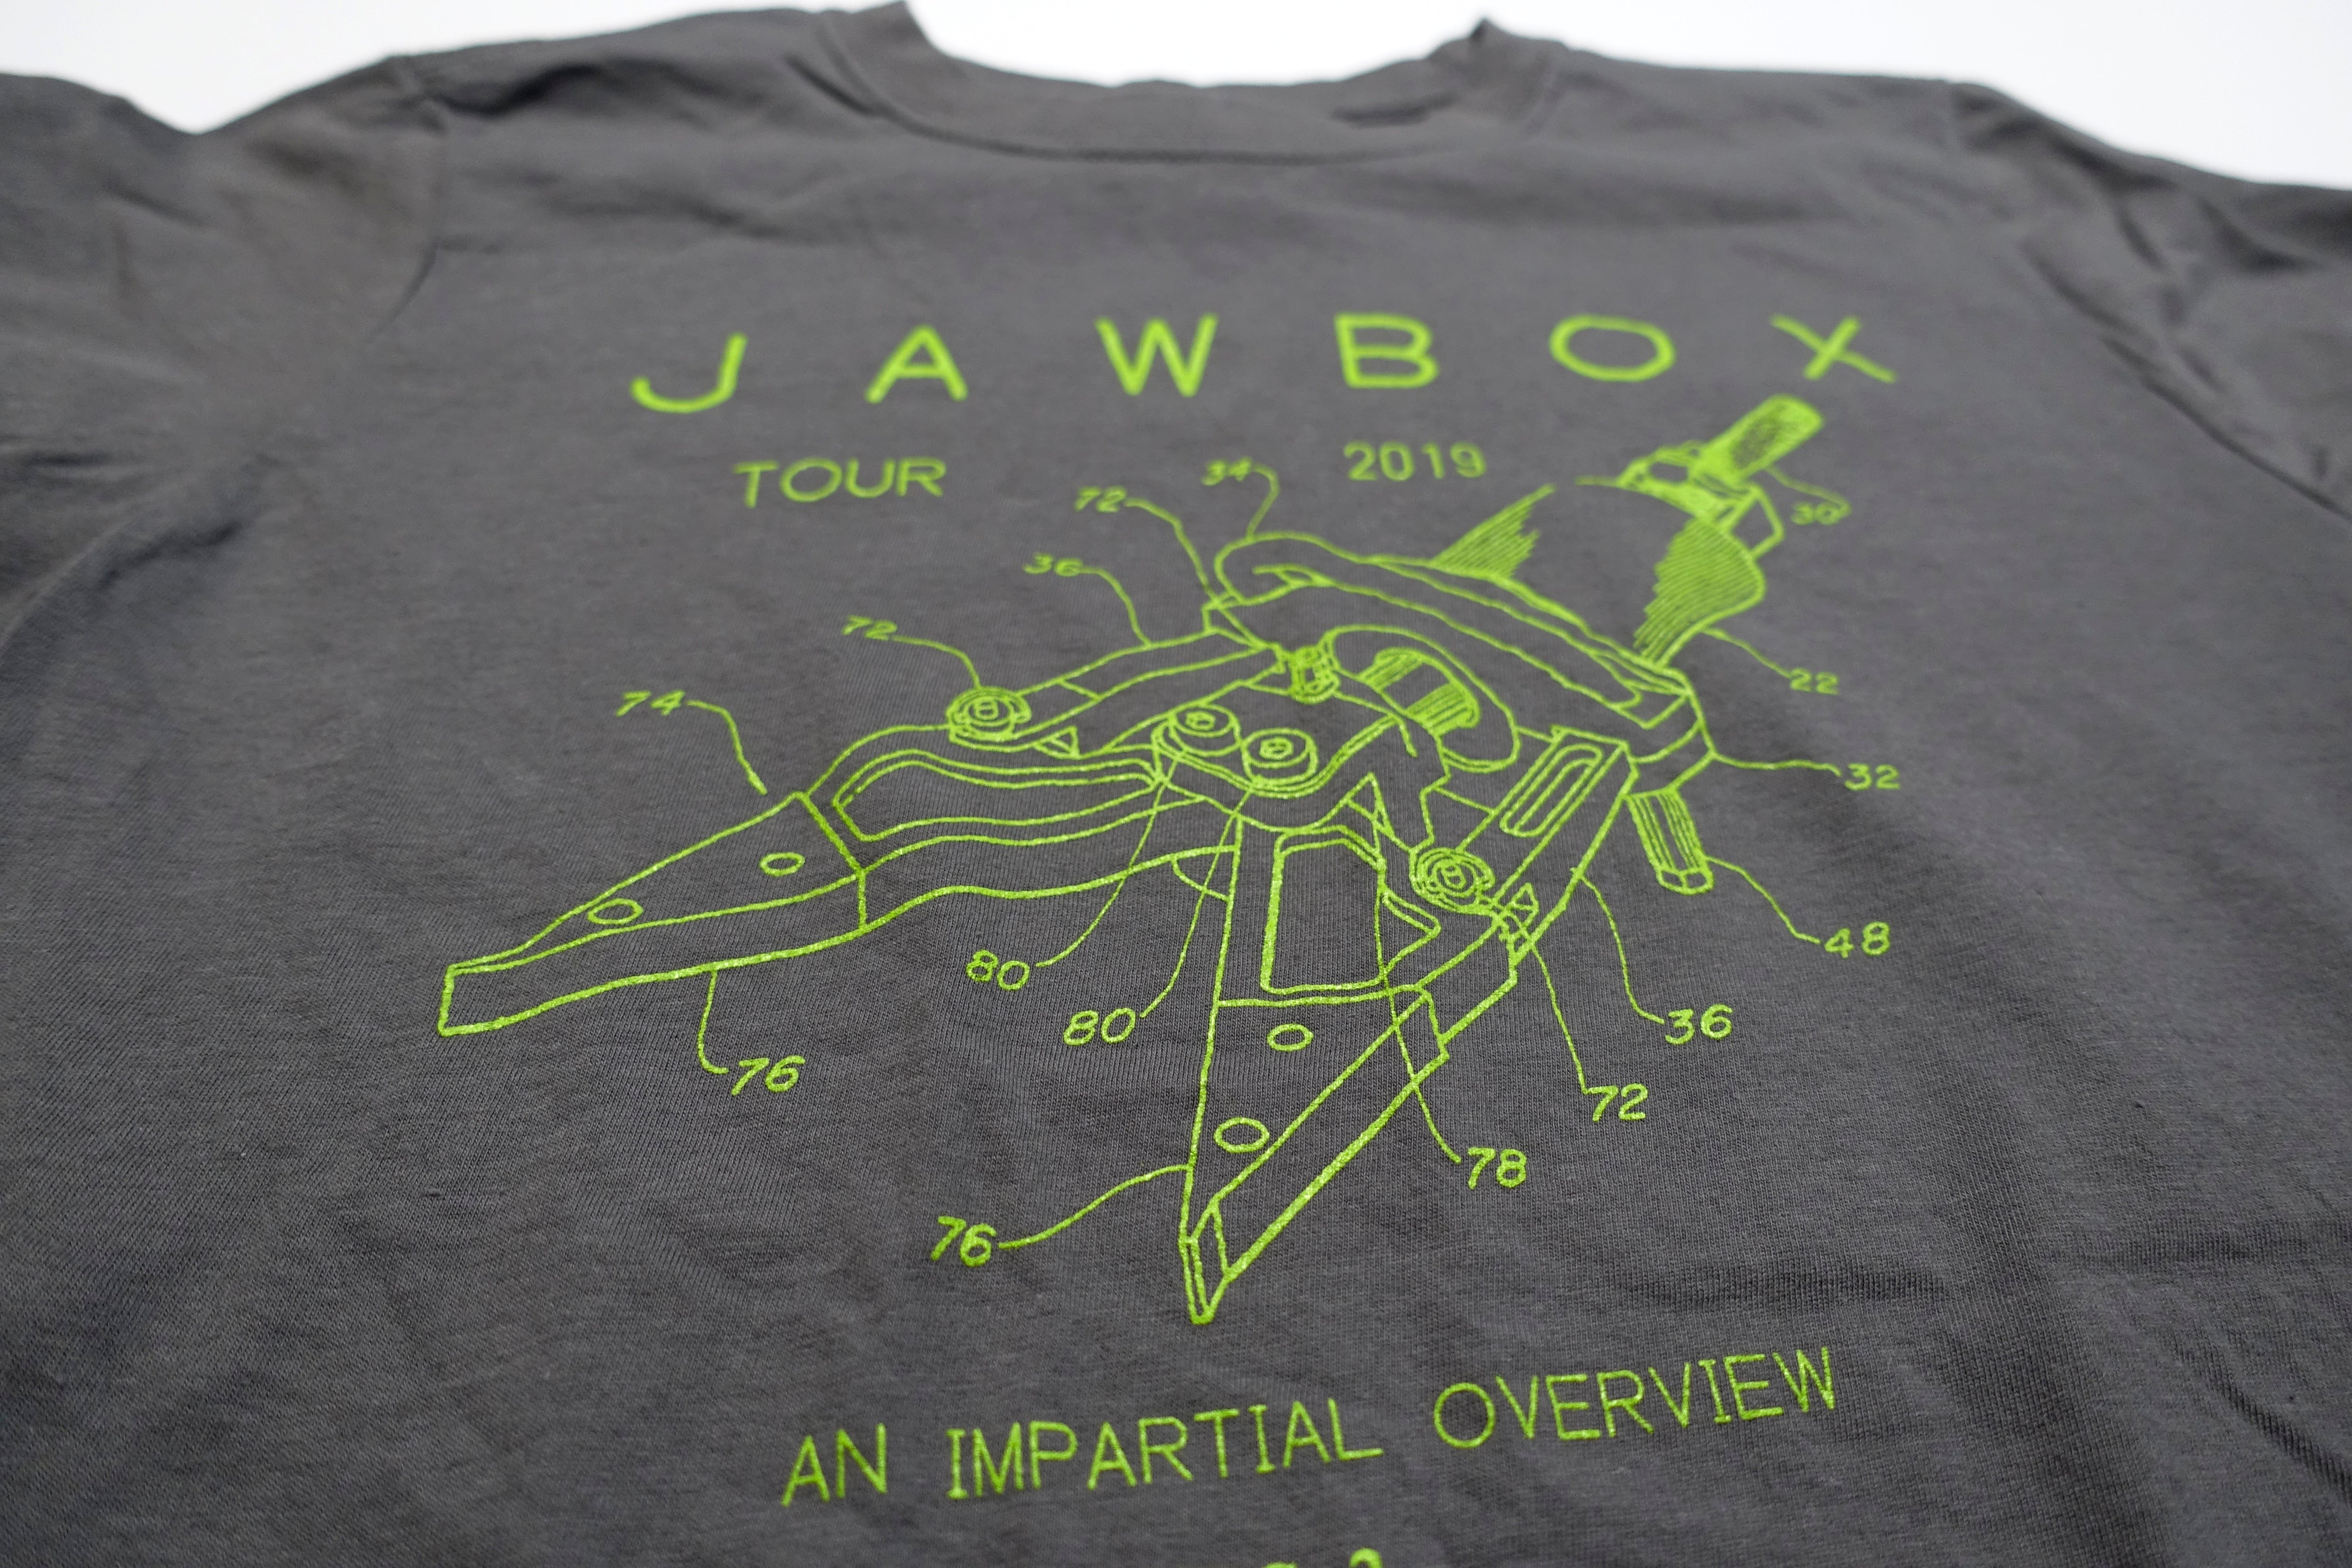 Jawbox - An Impartial Overview 2019 Tour Shirt Size SMALL